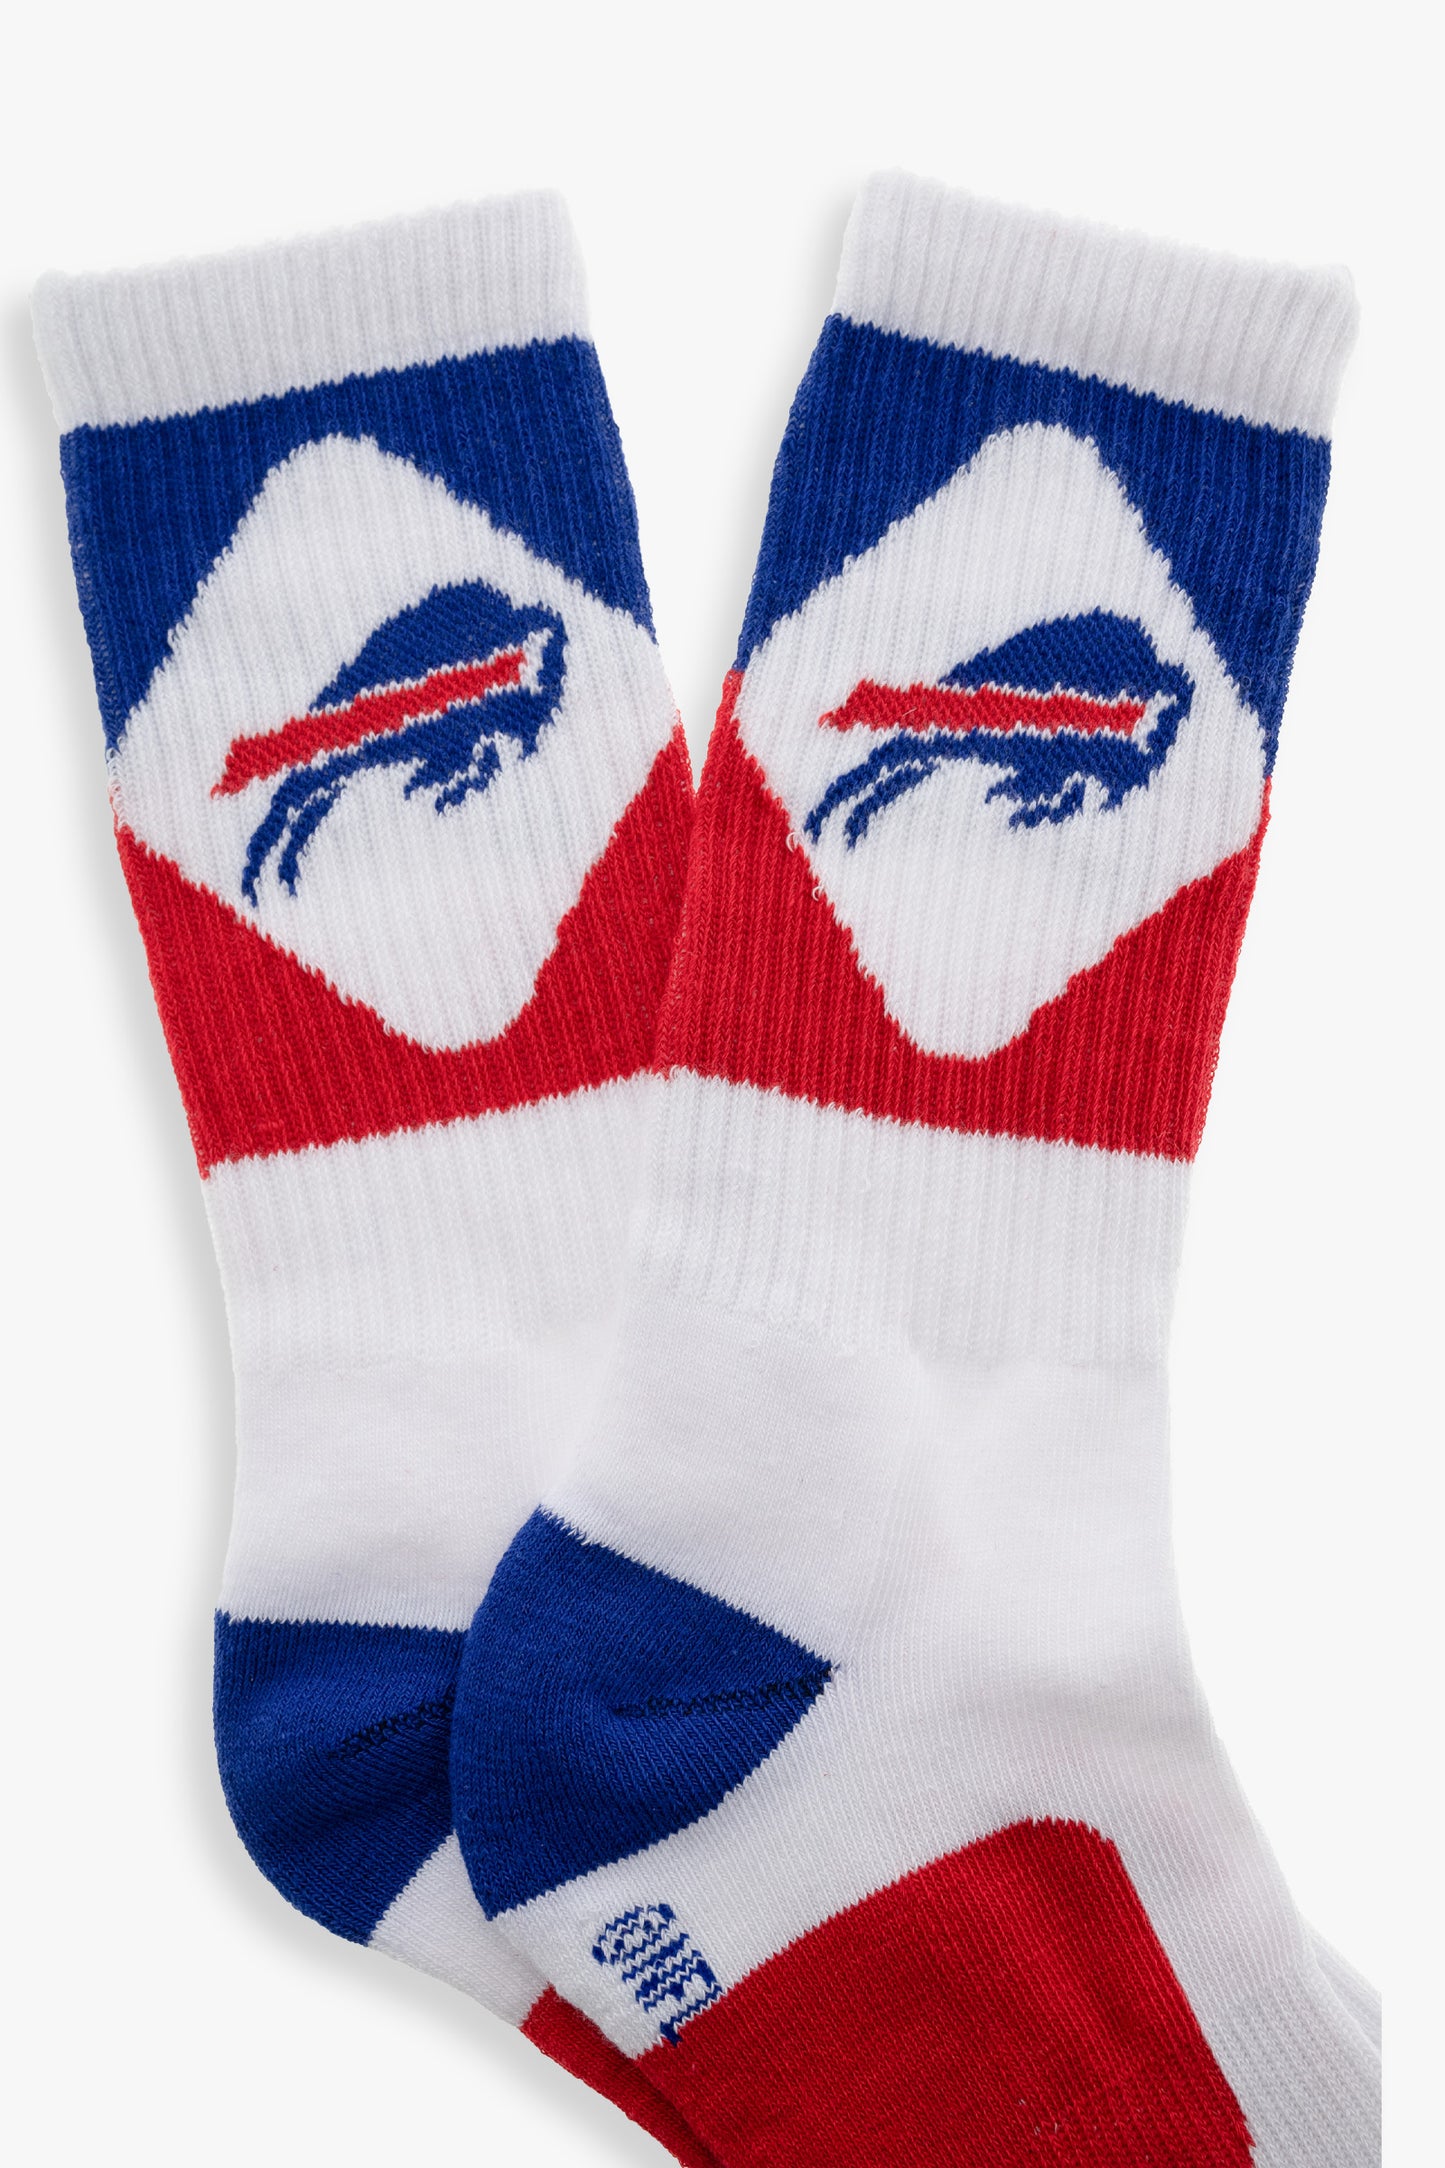 NFL Men's 3-Pack Sport Crew Fan Socks | Sock Size 10-13 | Ribbed, Arch Support, Cushioned Sole | Football Team Variations